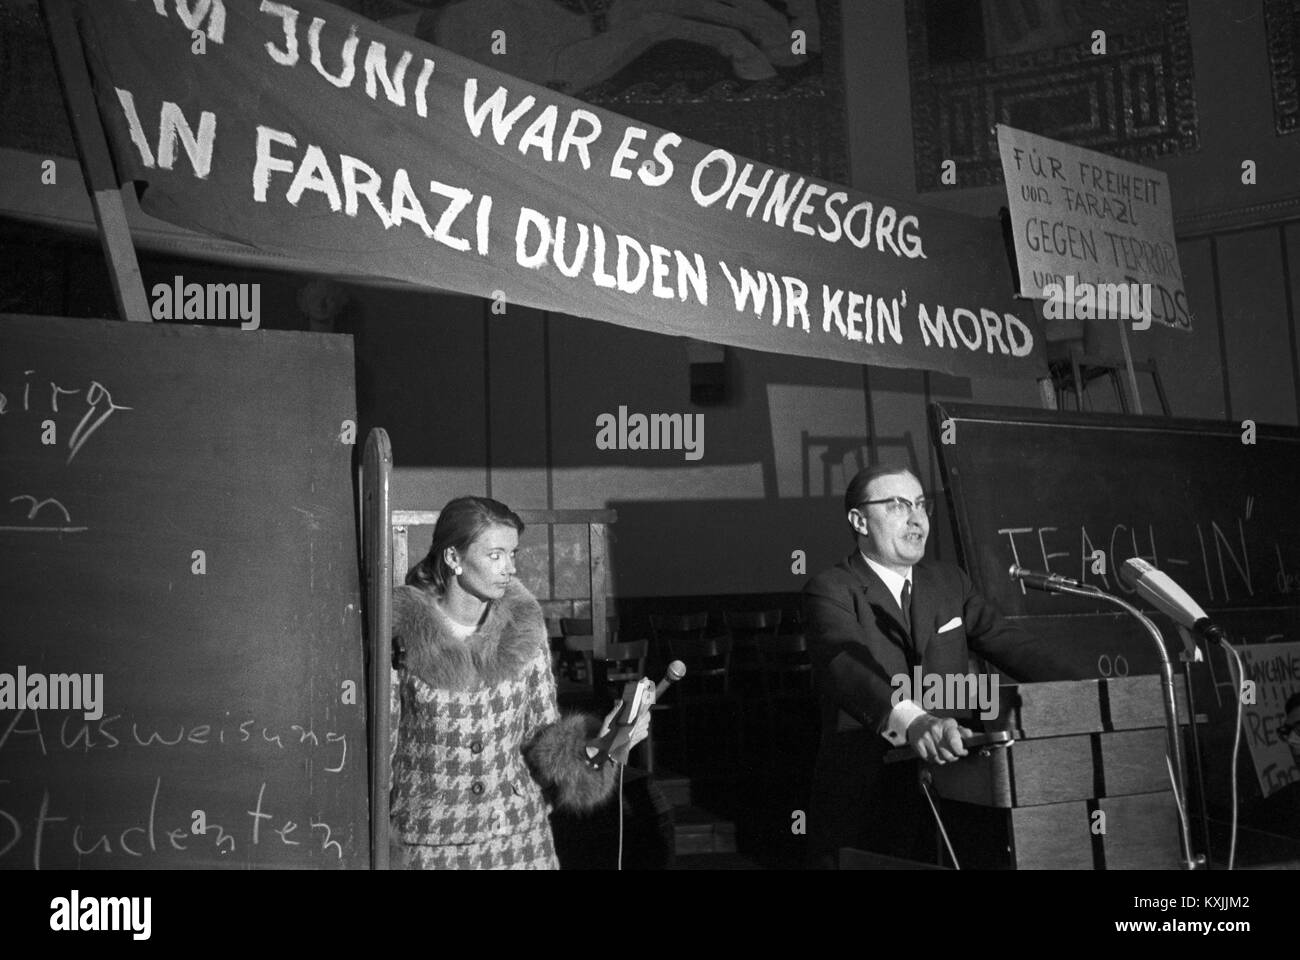 President of the University of Munich Prof. Carl Becker gives a statement during a Teach-in on 19 December 1967 and ensures that the Iranian student Farazi will be protected by the university. Farazi had neglected to leave Munich during the Shah visit in spring and asked for political asylum. | usage worldwide Stock Photo